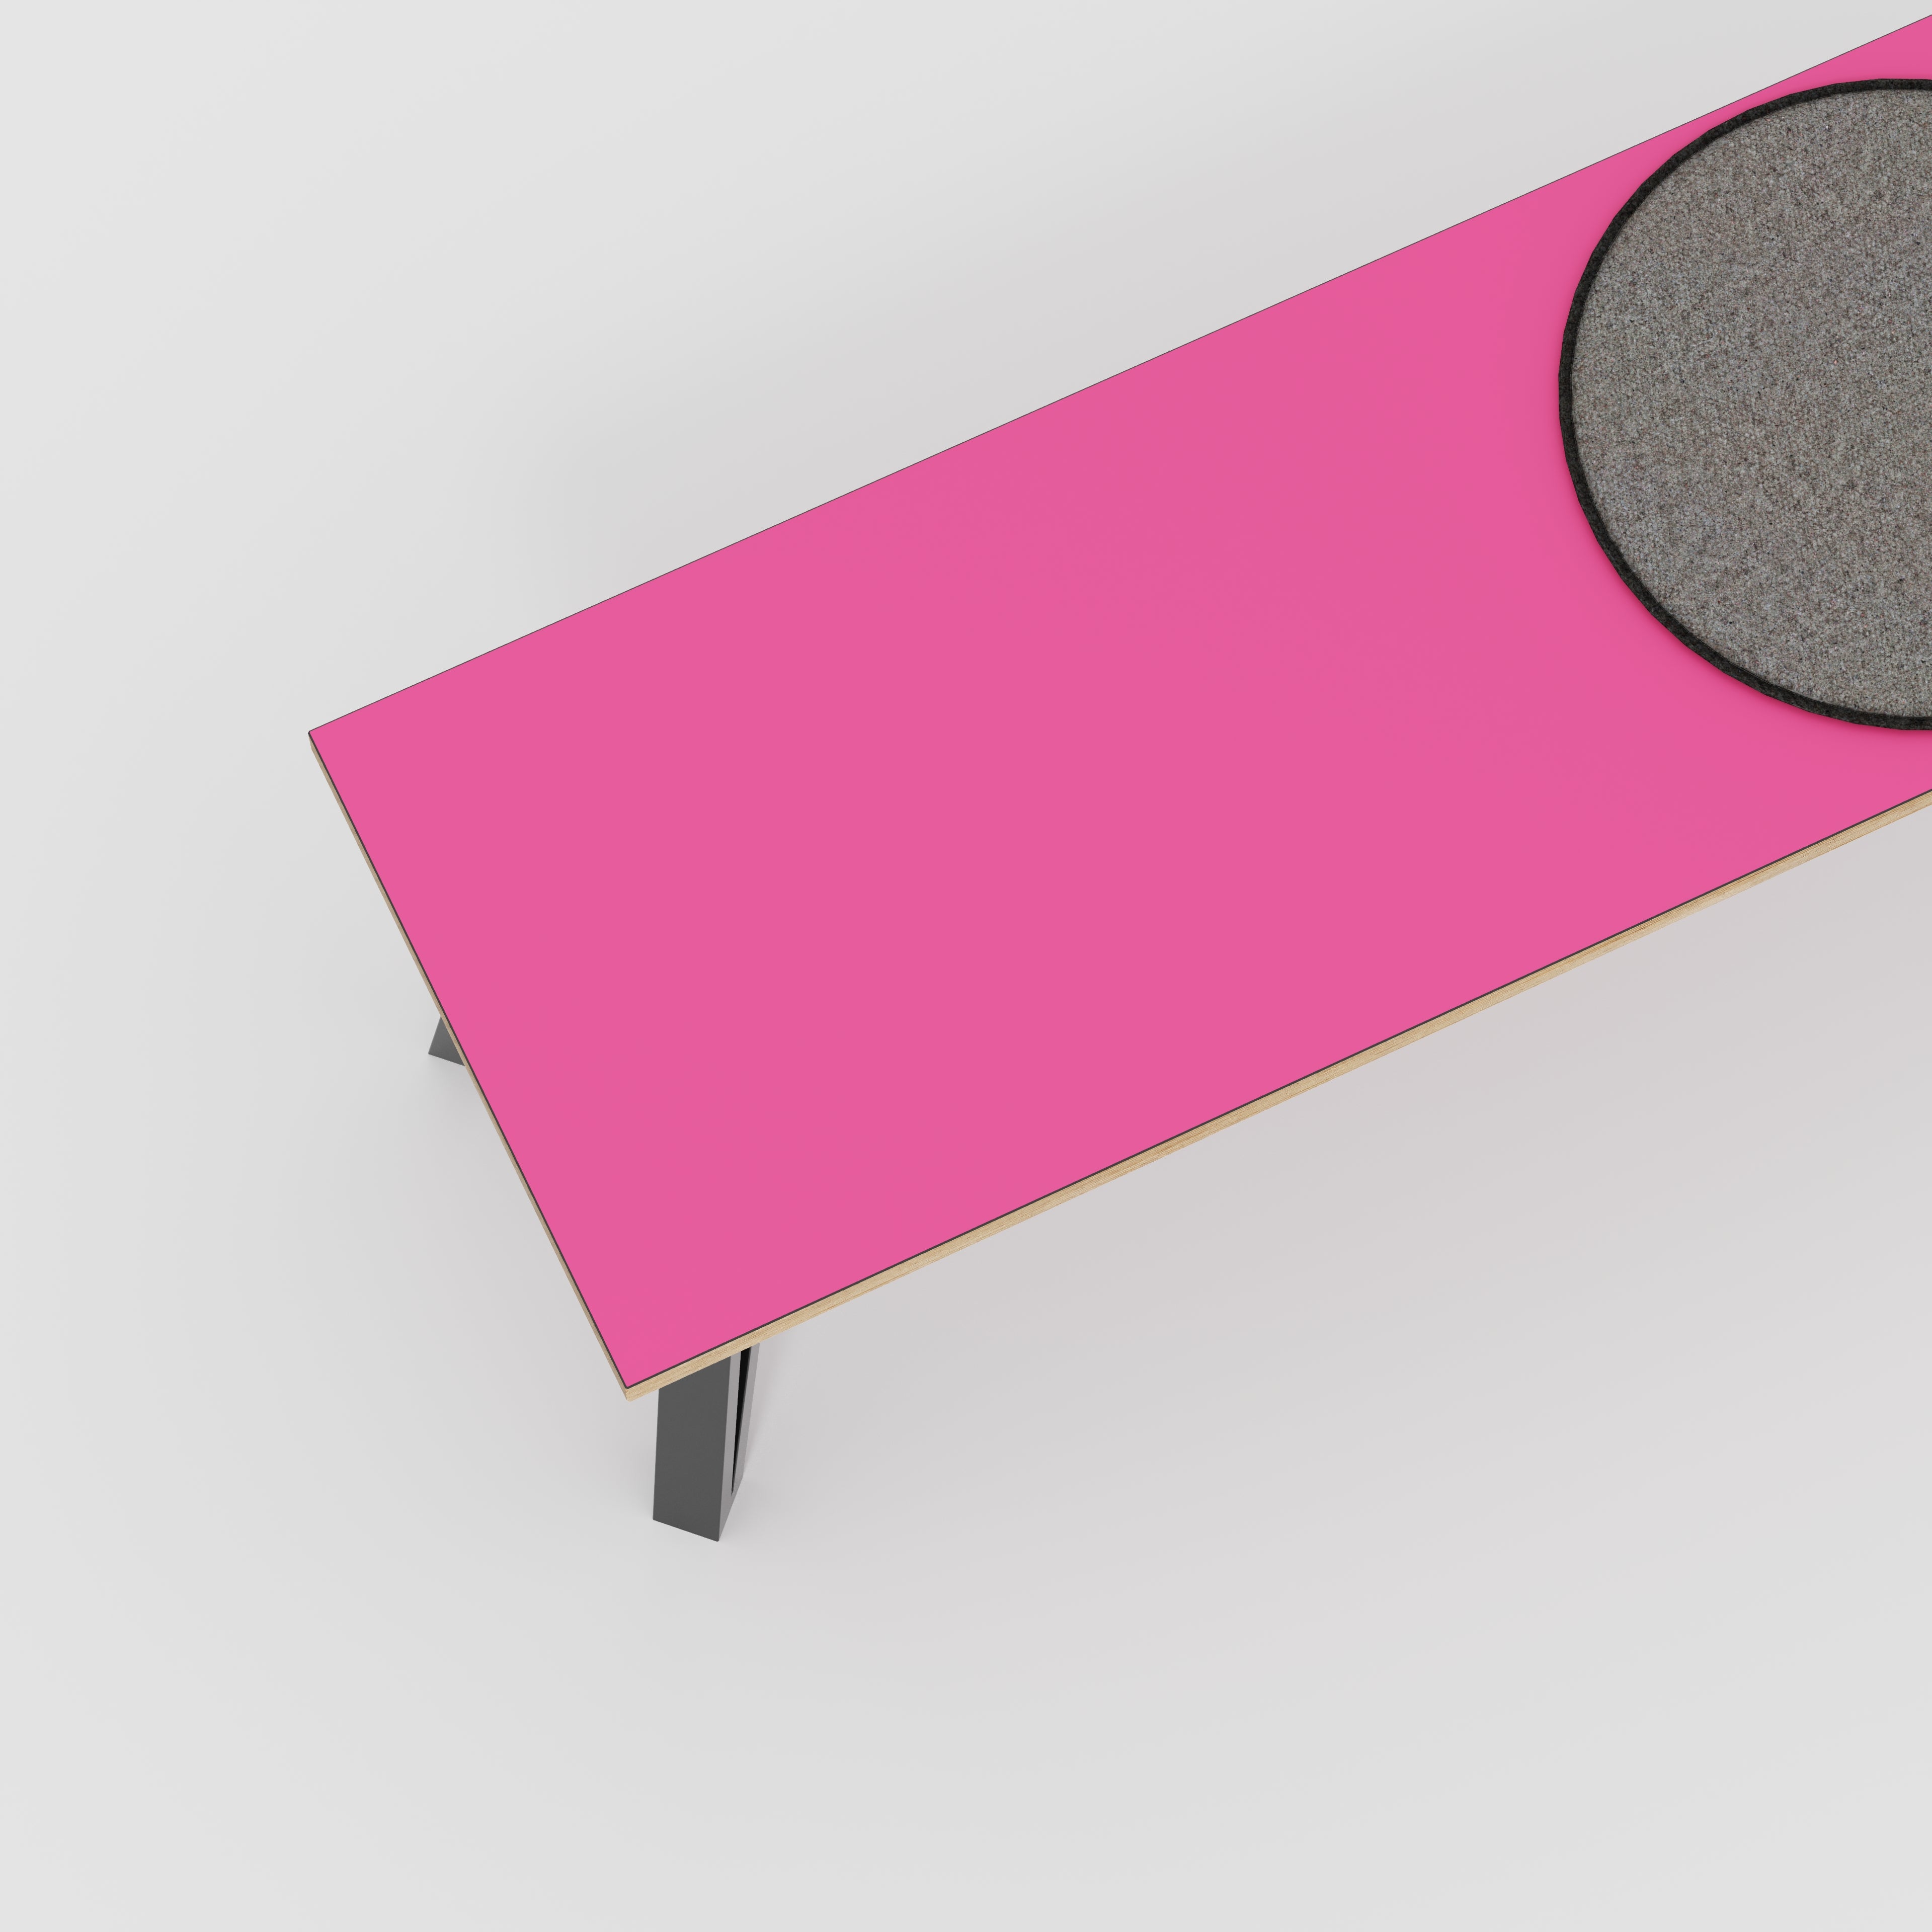 Bench Seat with Black Box Hairpin Legs - Formica Juicy Pink - 1600(w) x 400(d) x 450(h)